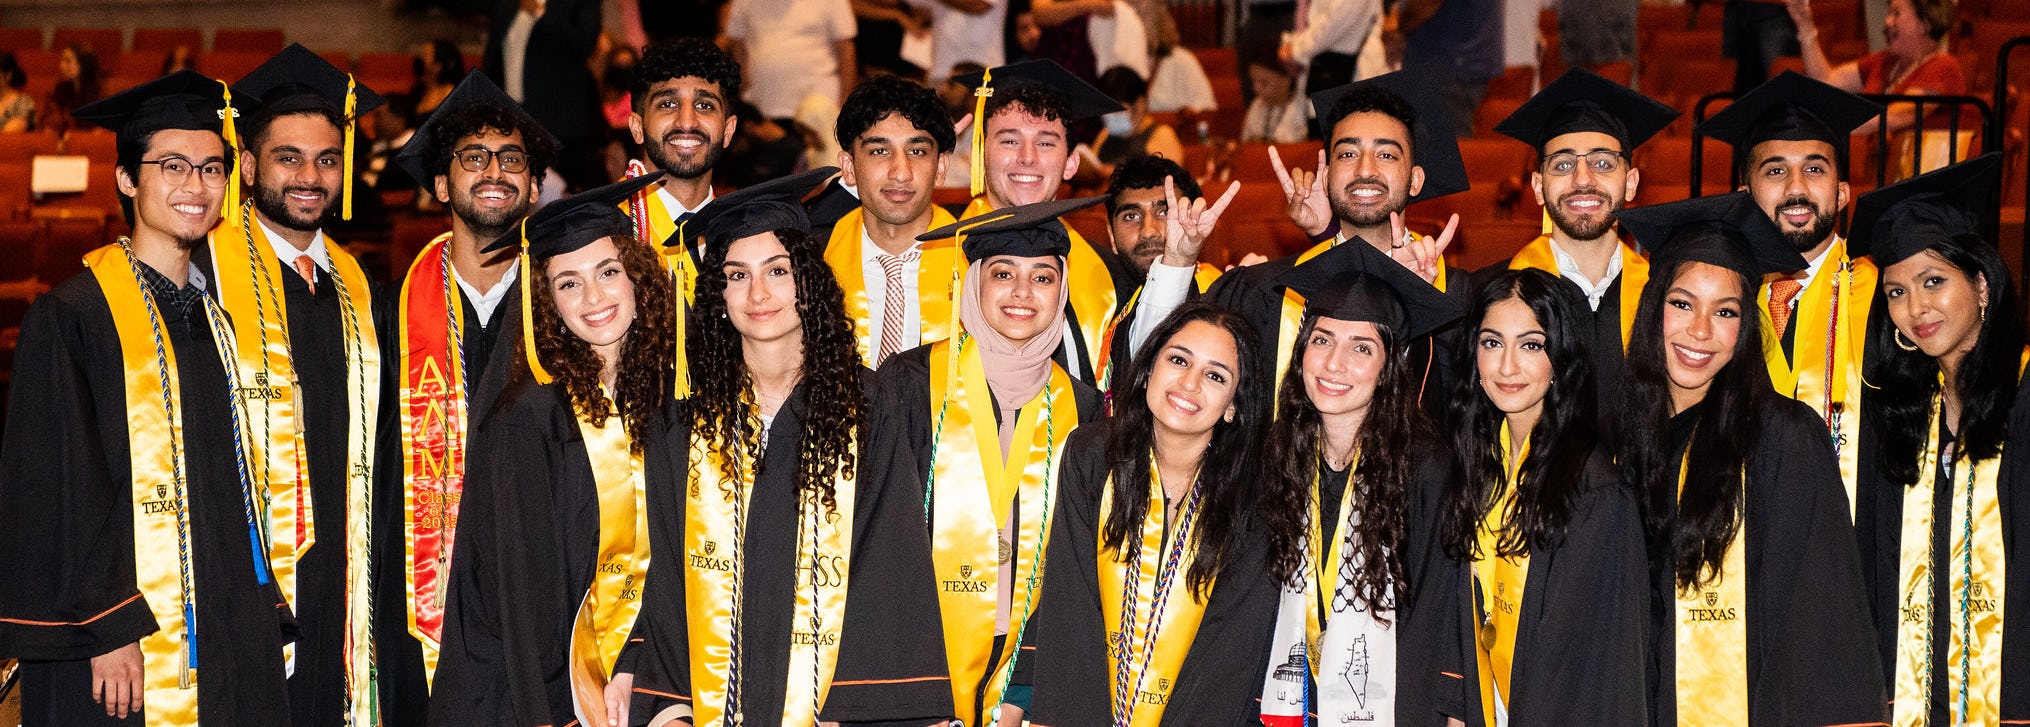 Students in caps and gowns smiling at camera